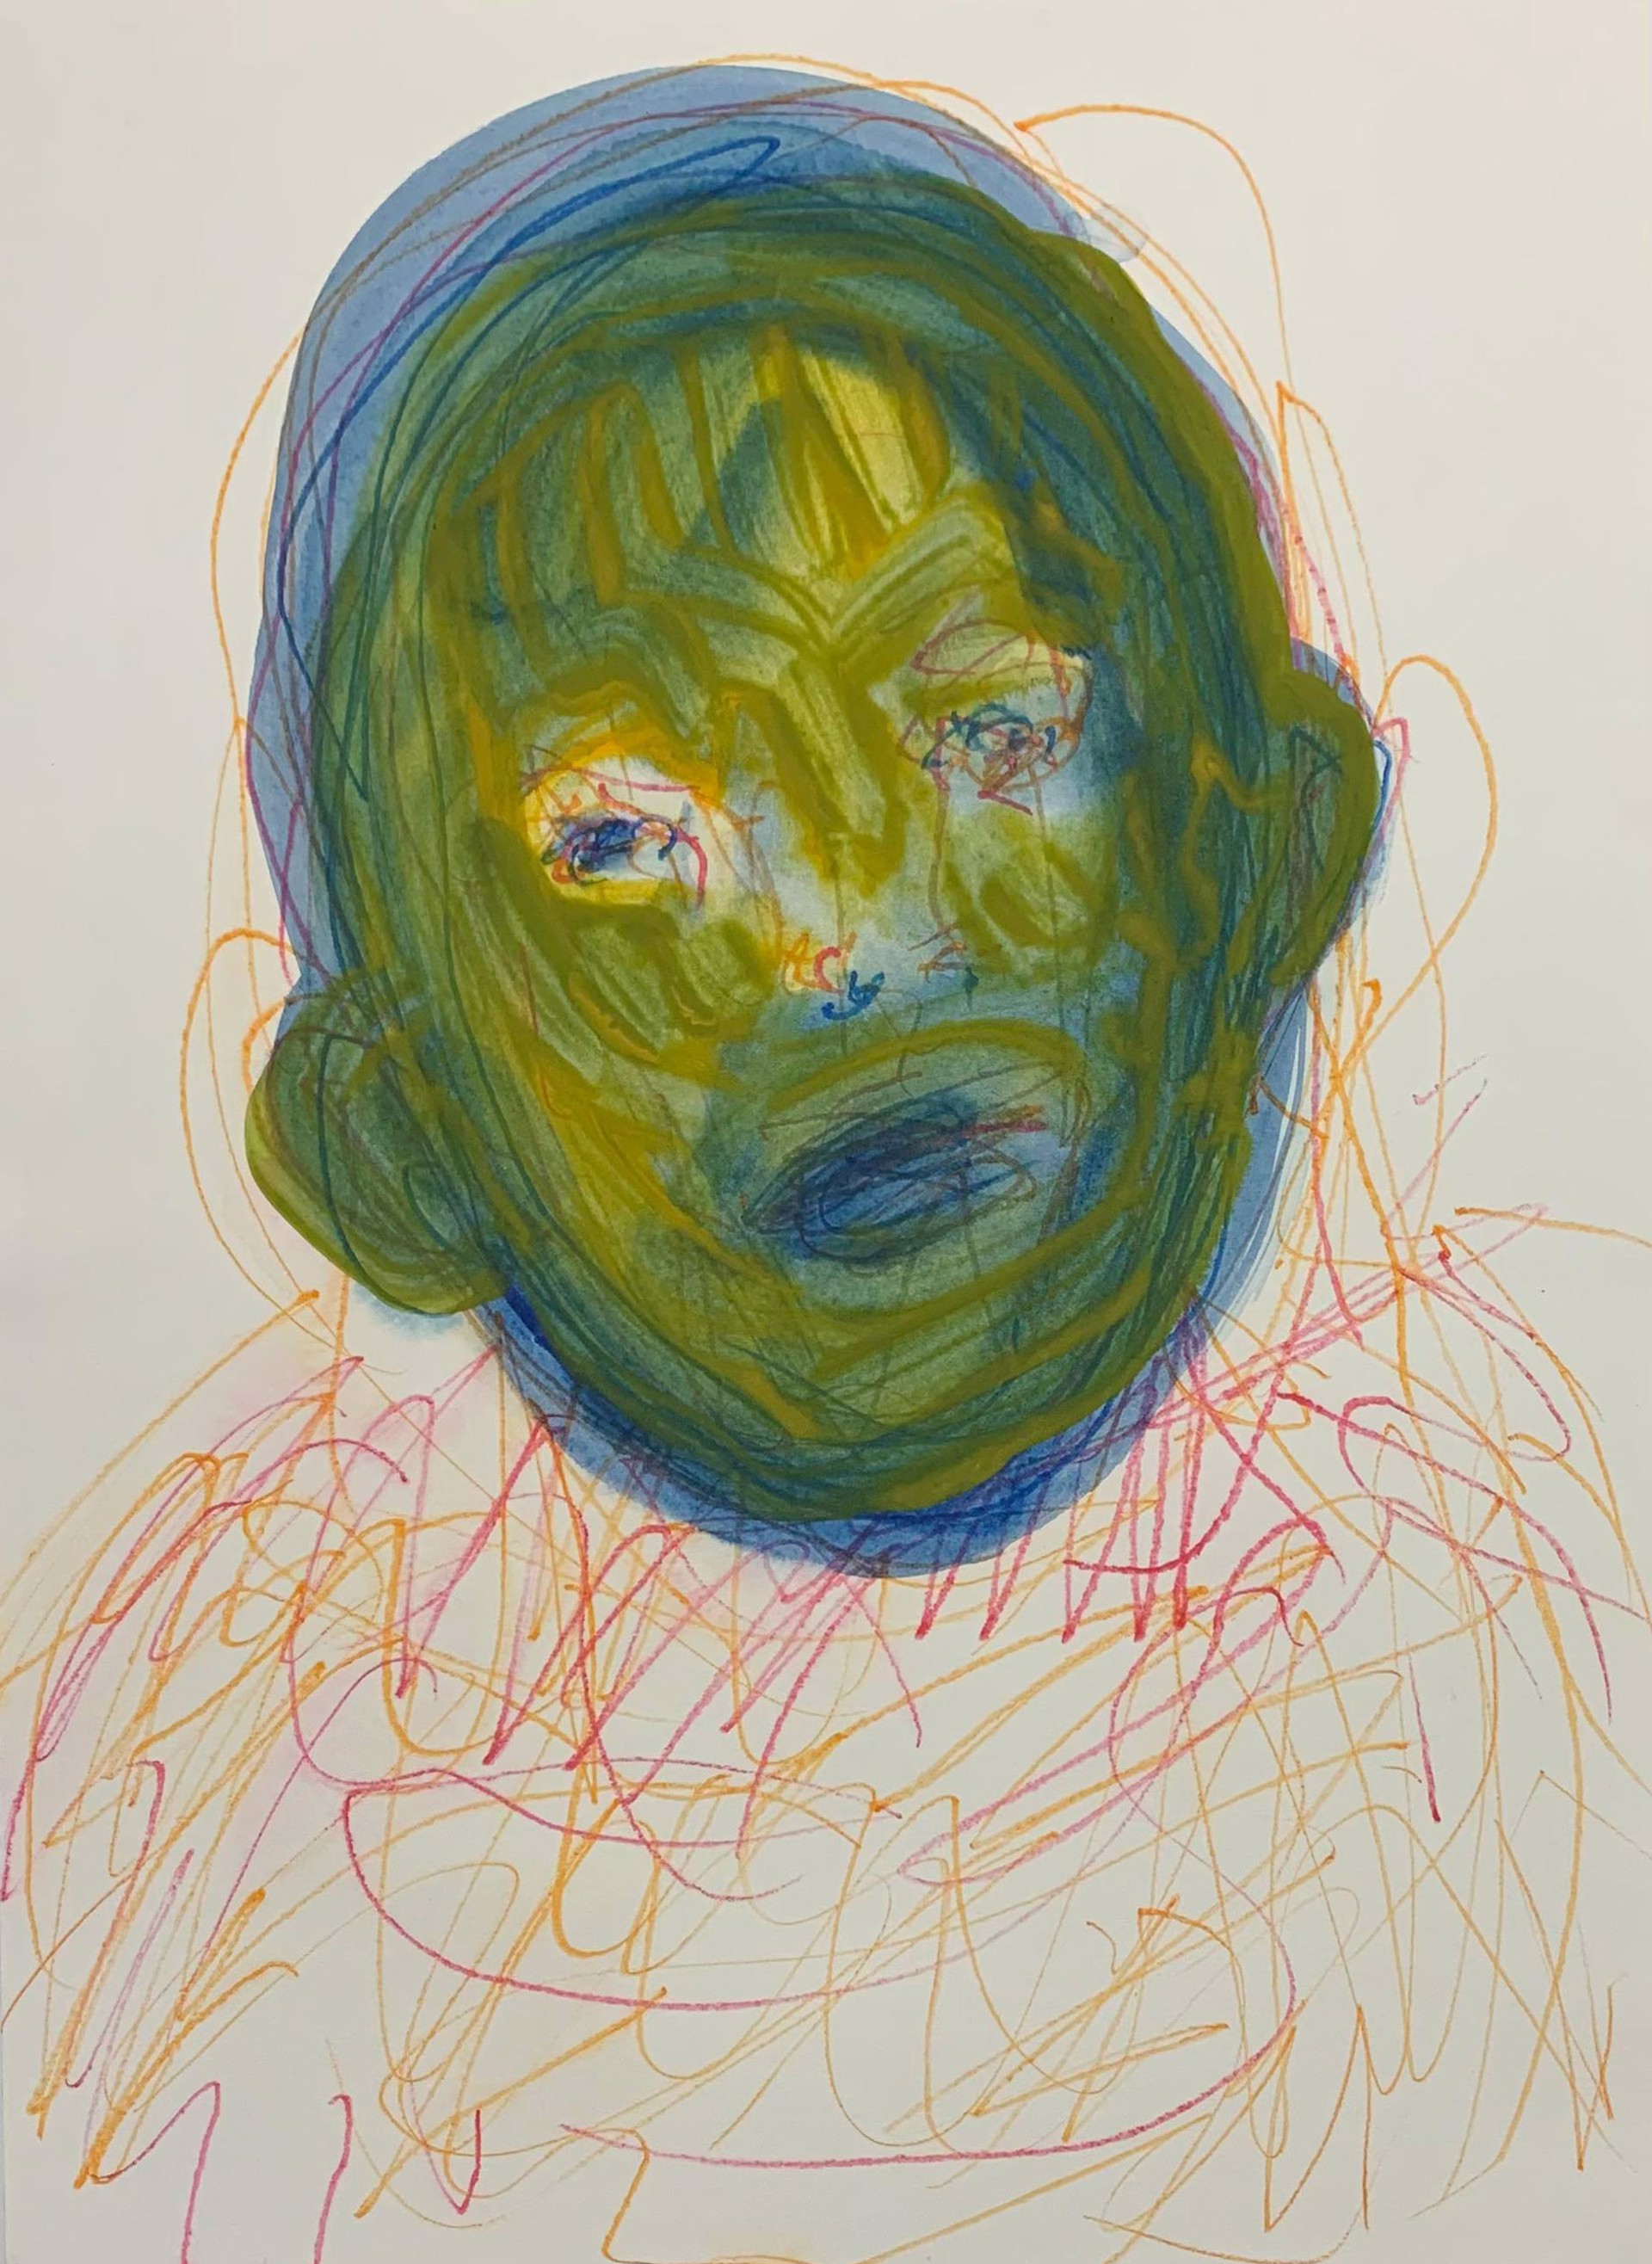 Untitled (Green Face) by Pia Chavarria